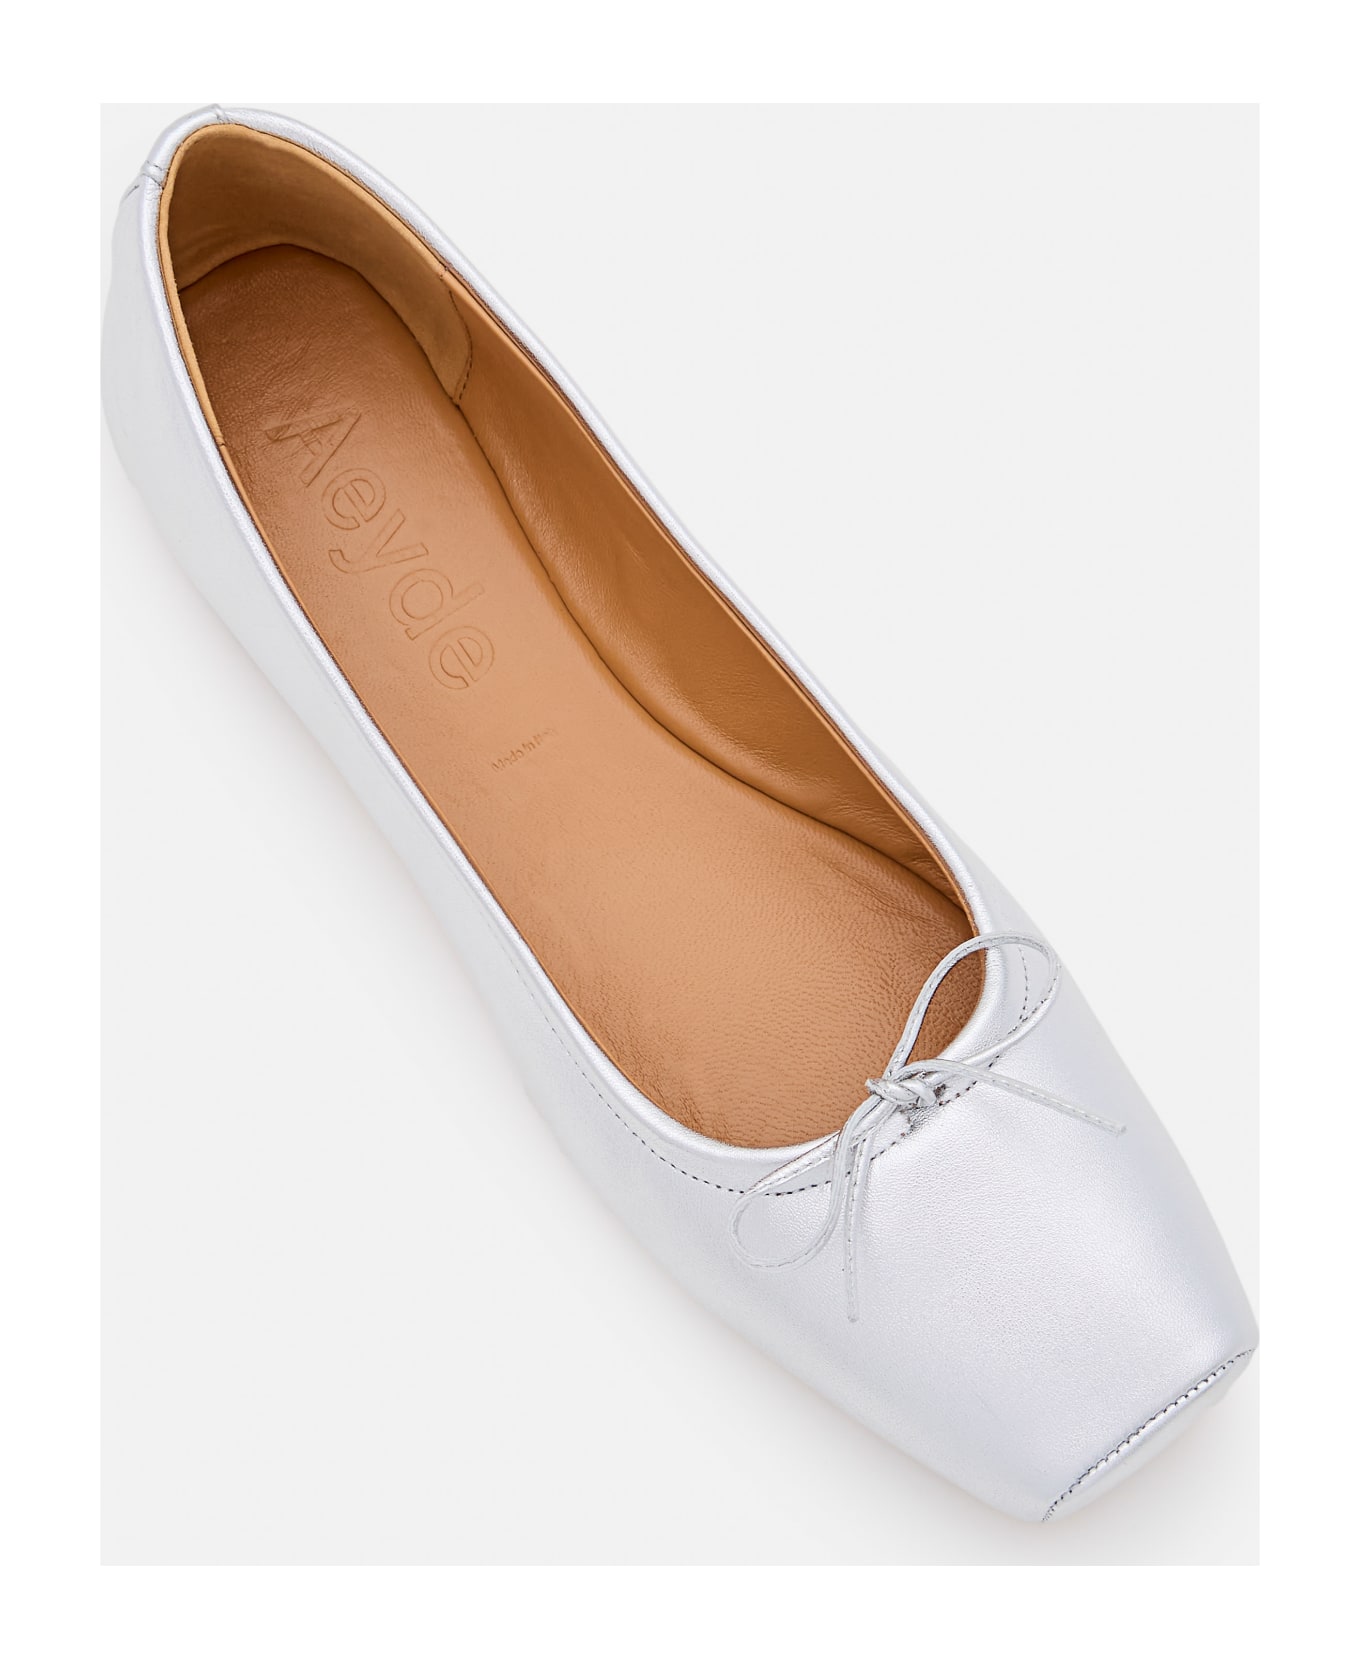 aeyde Gabriella Laminated Nappa Leather Ballet Flat - Silver フラットシューズ